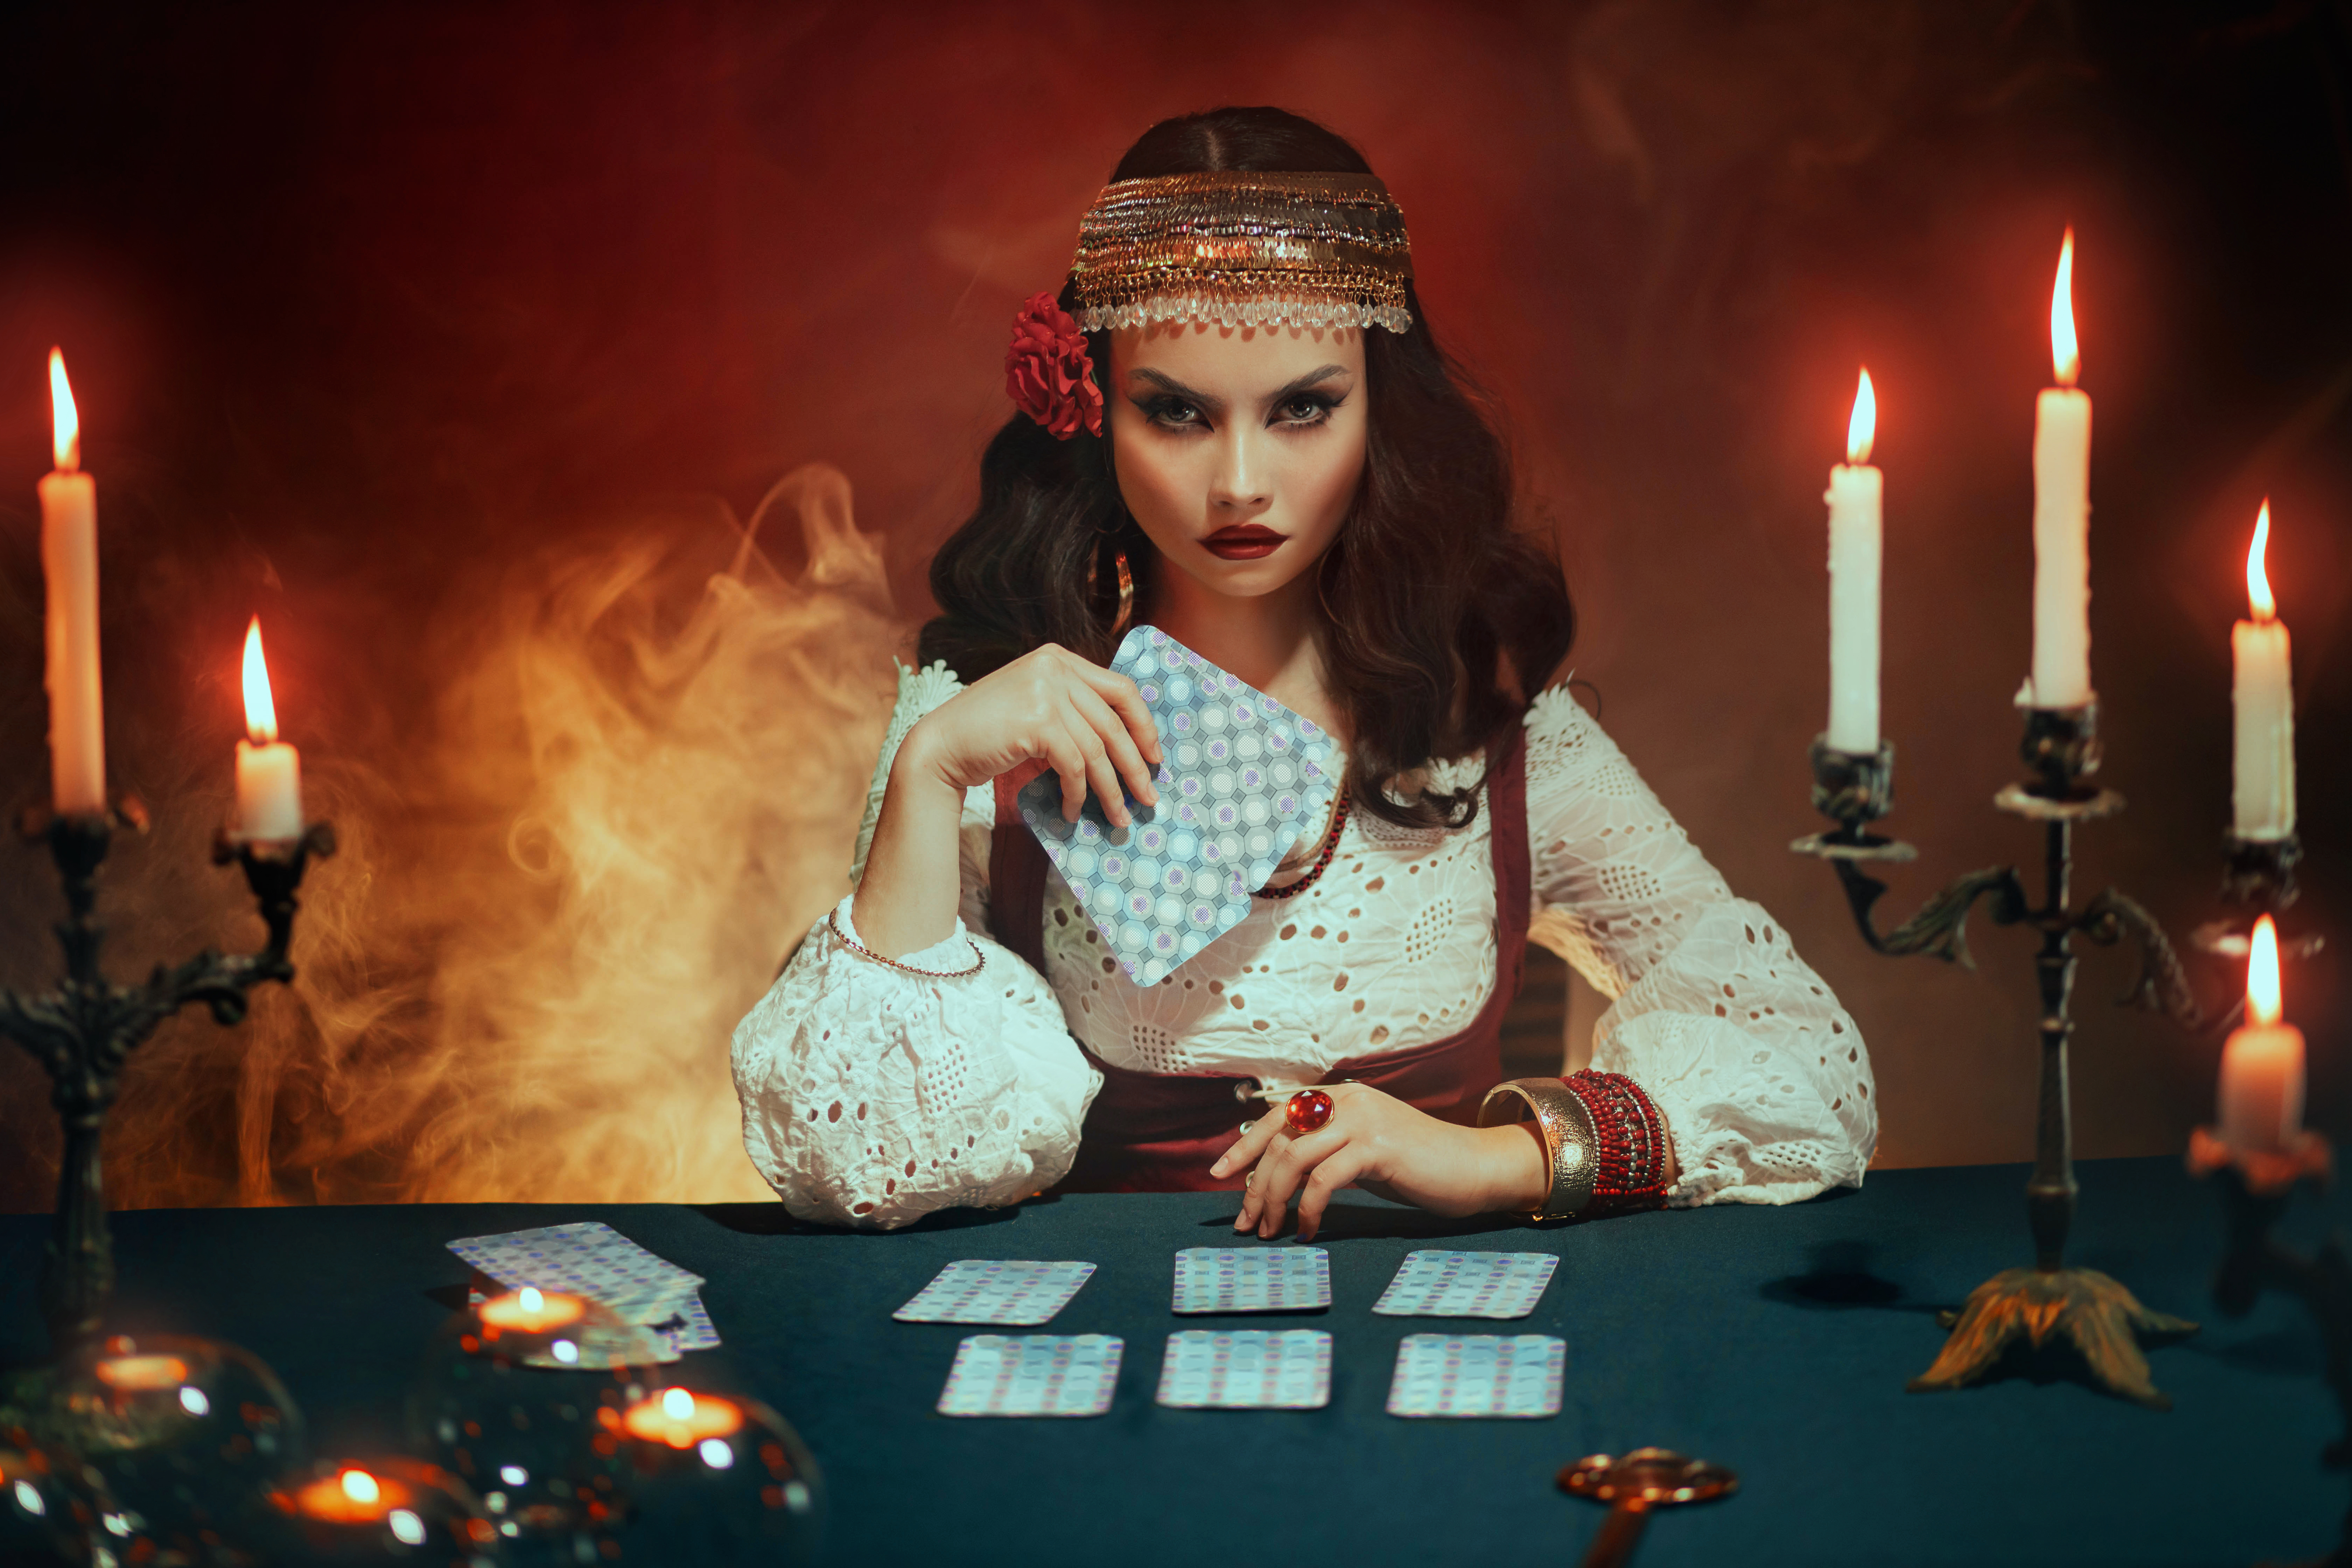 A psychic reader sitting at a table and holding cards.